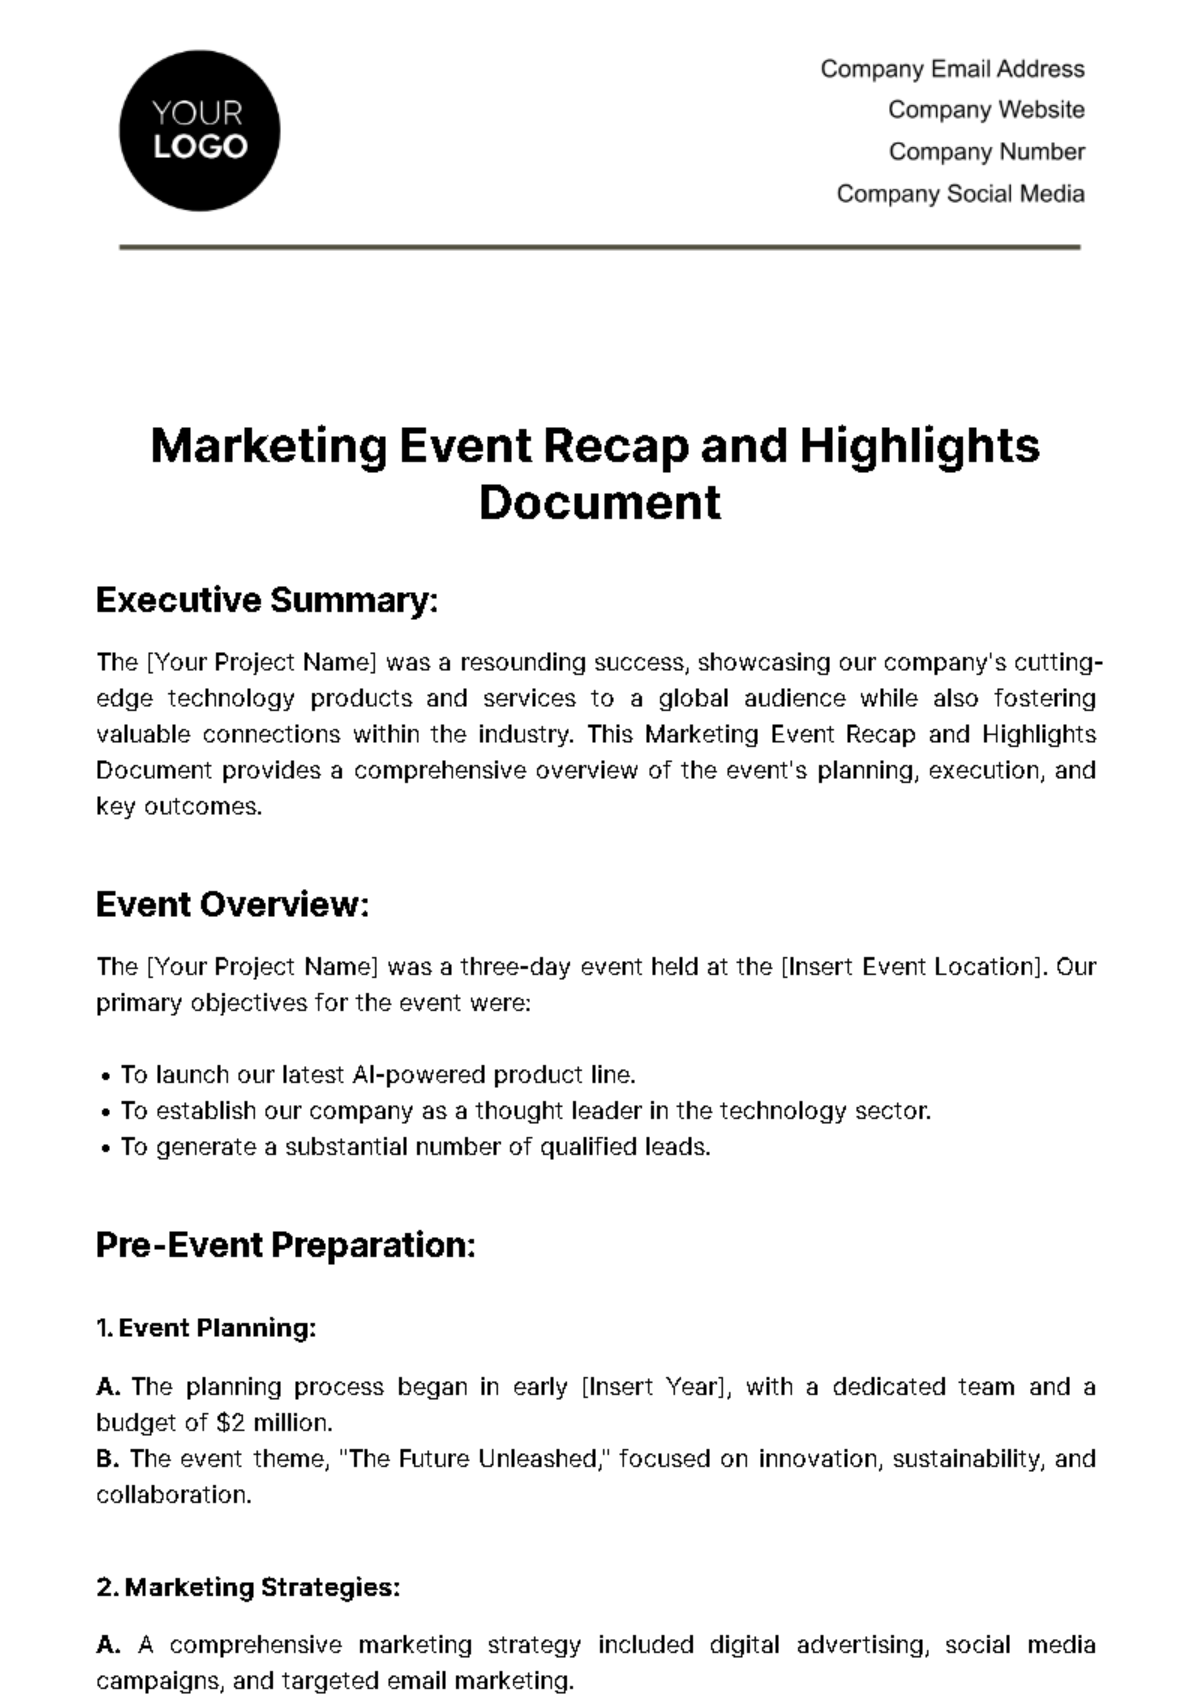 Free Marketing Event Recap and Highlights Document Template